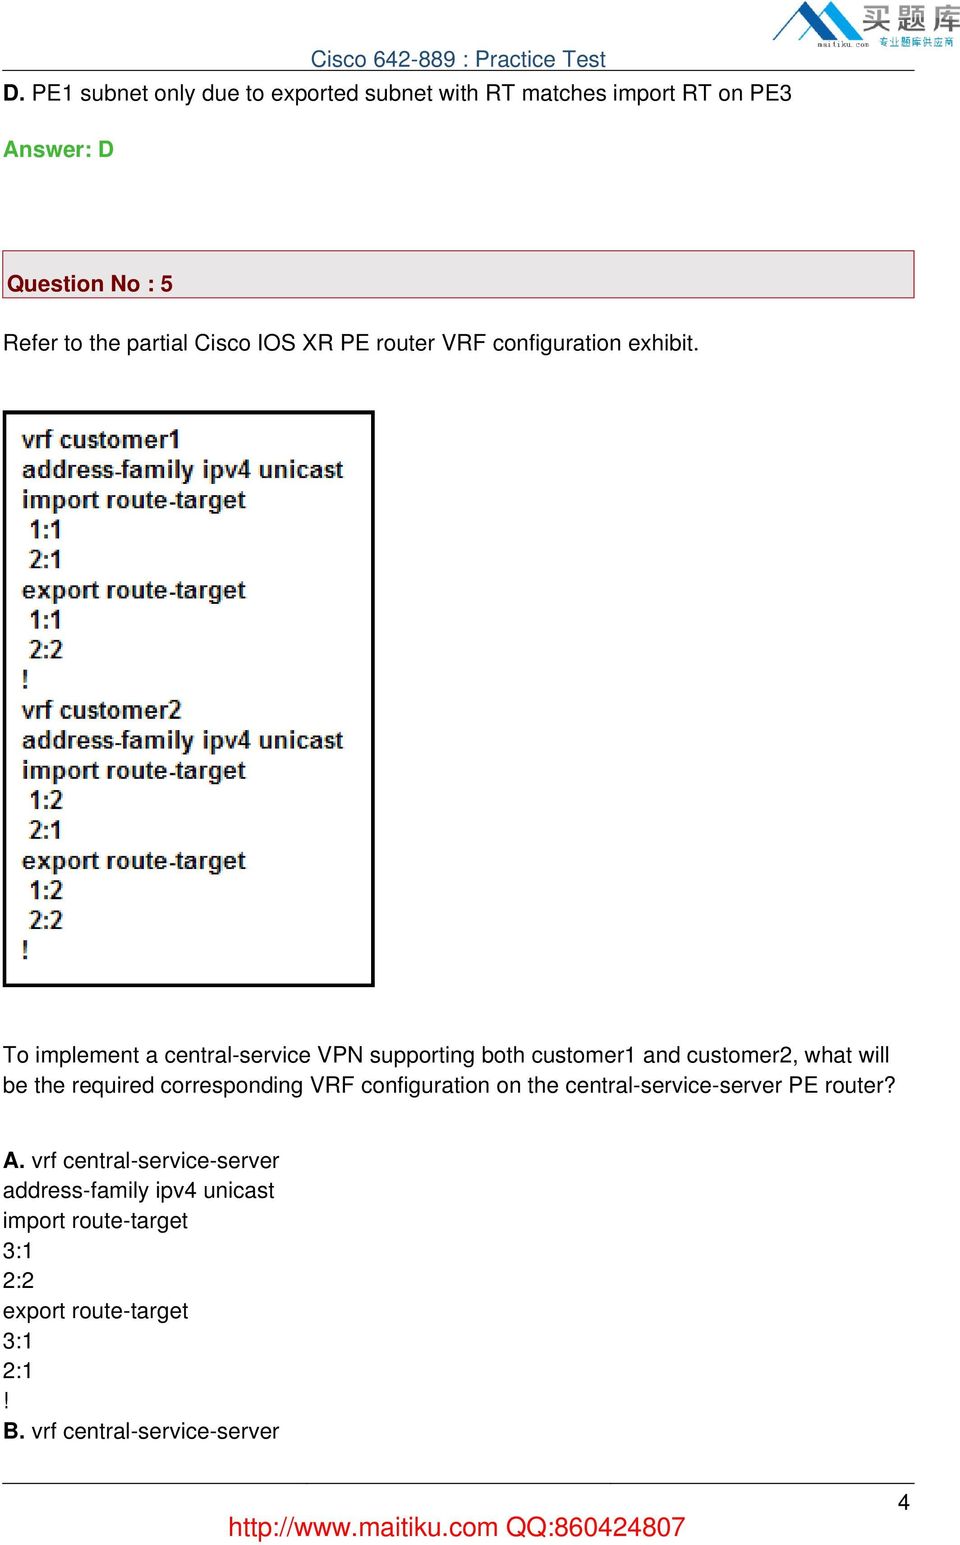 To implement a central-service VPN supporting both customer1 and customer2, what will be the required corresponding VRF